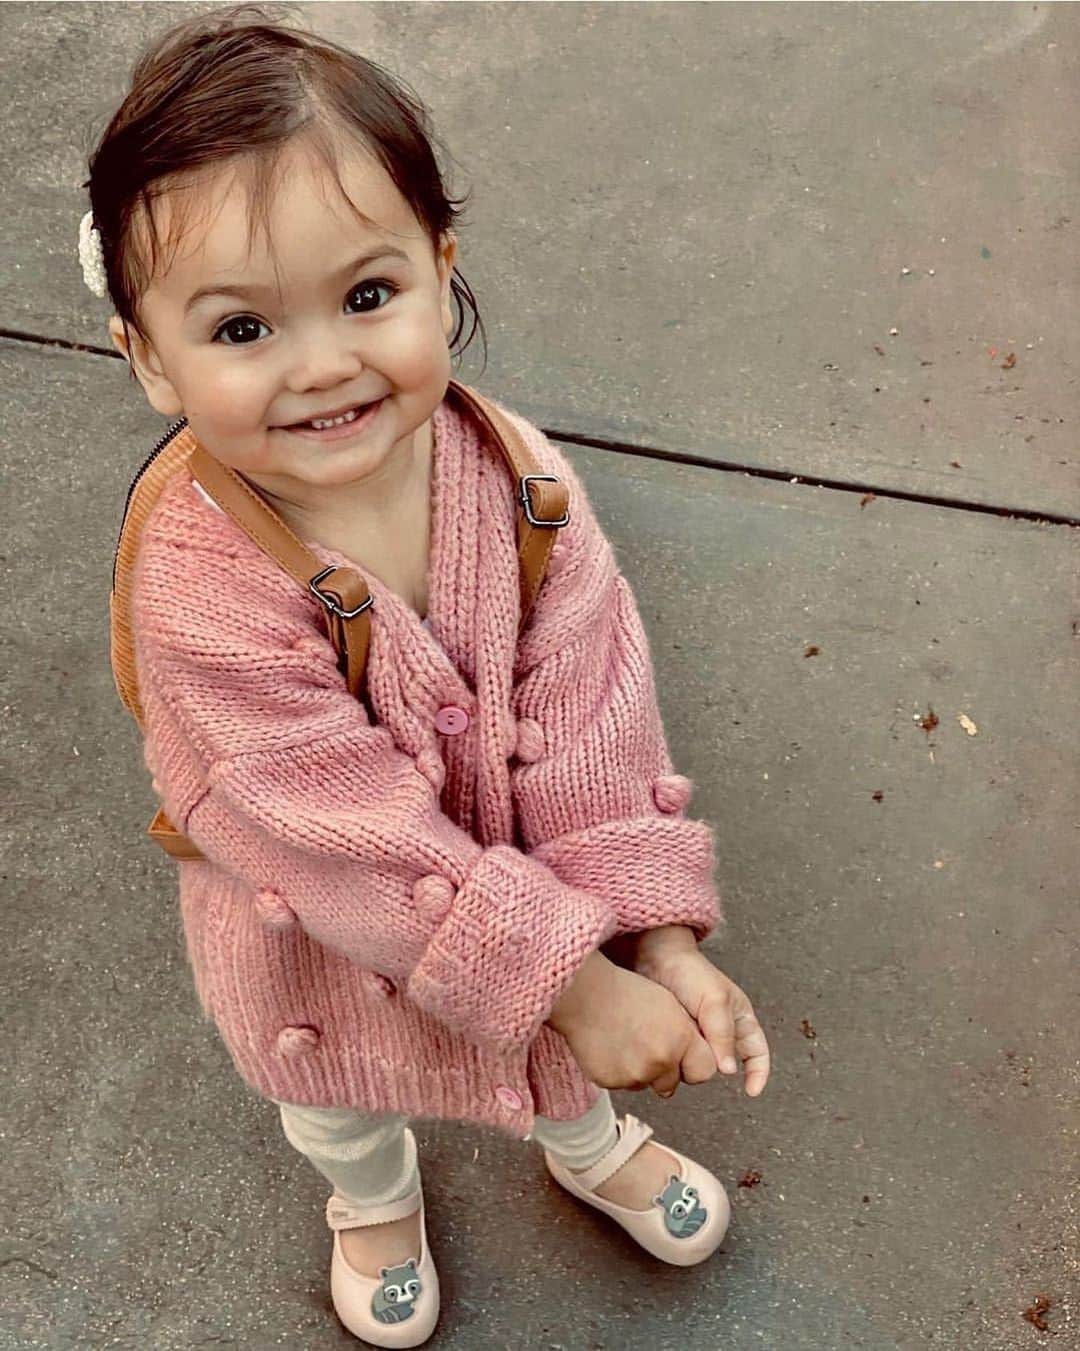 Fashion Kidsのインスタグラム：「Who's ready for sweater weather?🍁🍂 Shop the 𝙘𝙪𝙩𝙚𝙨𝙩 𝙠𝙣𝙞𝙩𝙬𝙚𝙖𝙧 @tiggysboutique 🛍 Adorable and affordable www.tiggysboutique.com  📷 @demidmitra」